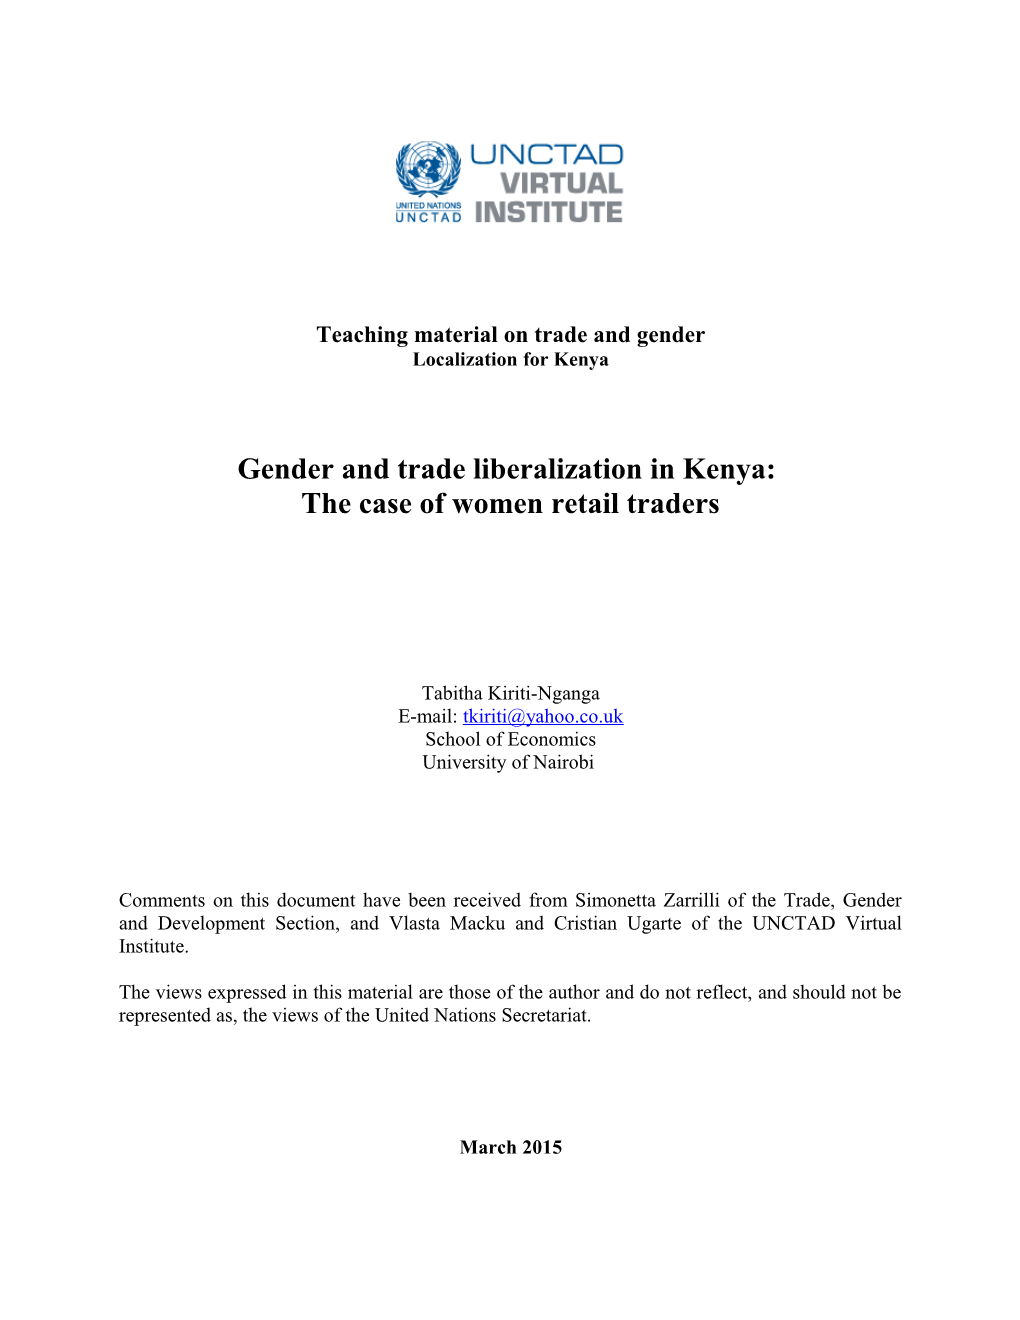 Teaching Material on Trade and Gender